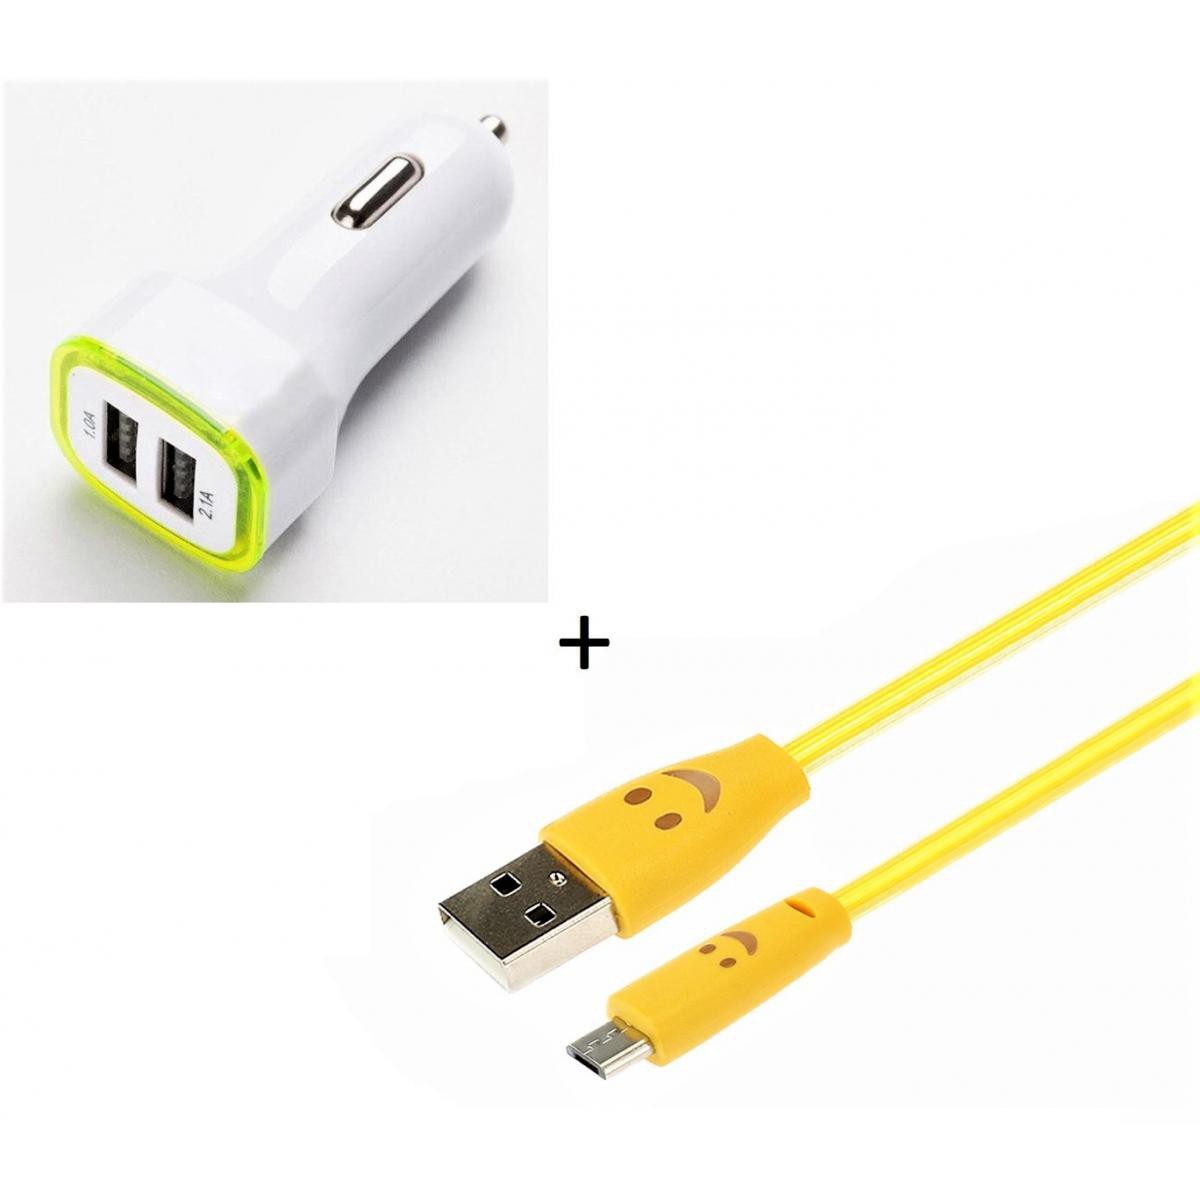 Shot - Pack Chargeur Voiture pour WIKO View 3 Lite Smartphone Micro USB (Cable Smiley + Double Adaptateur LED Allume Cigare) (JAUNE) - Chargeur Voiture 12V